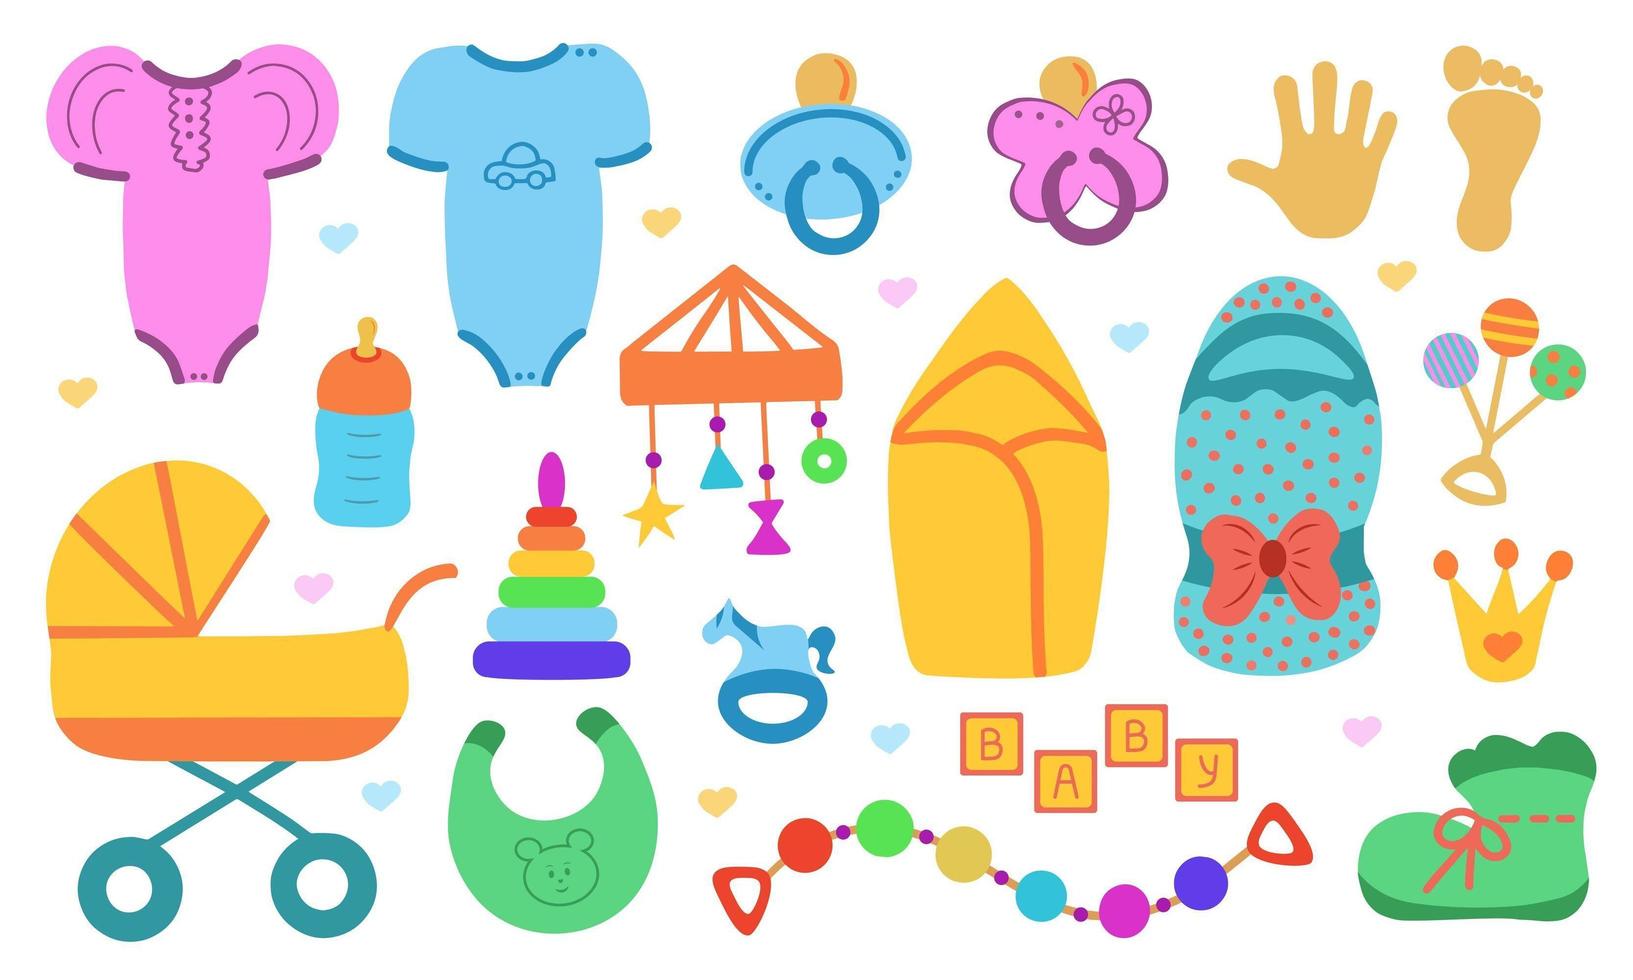 Newborn things. Cute set of things for childrenhood. Isolated icons of baby goods for newborns. Clothing, toys, accessories for hygiene, food for Infant. vector